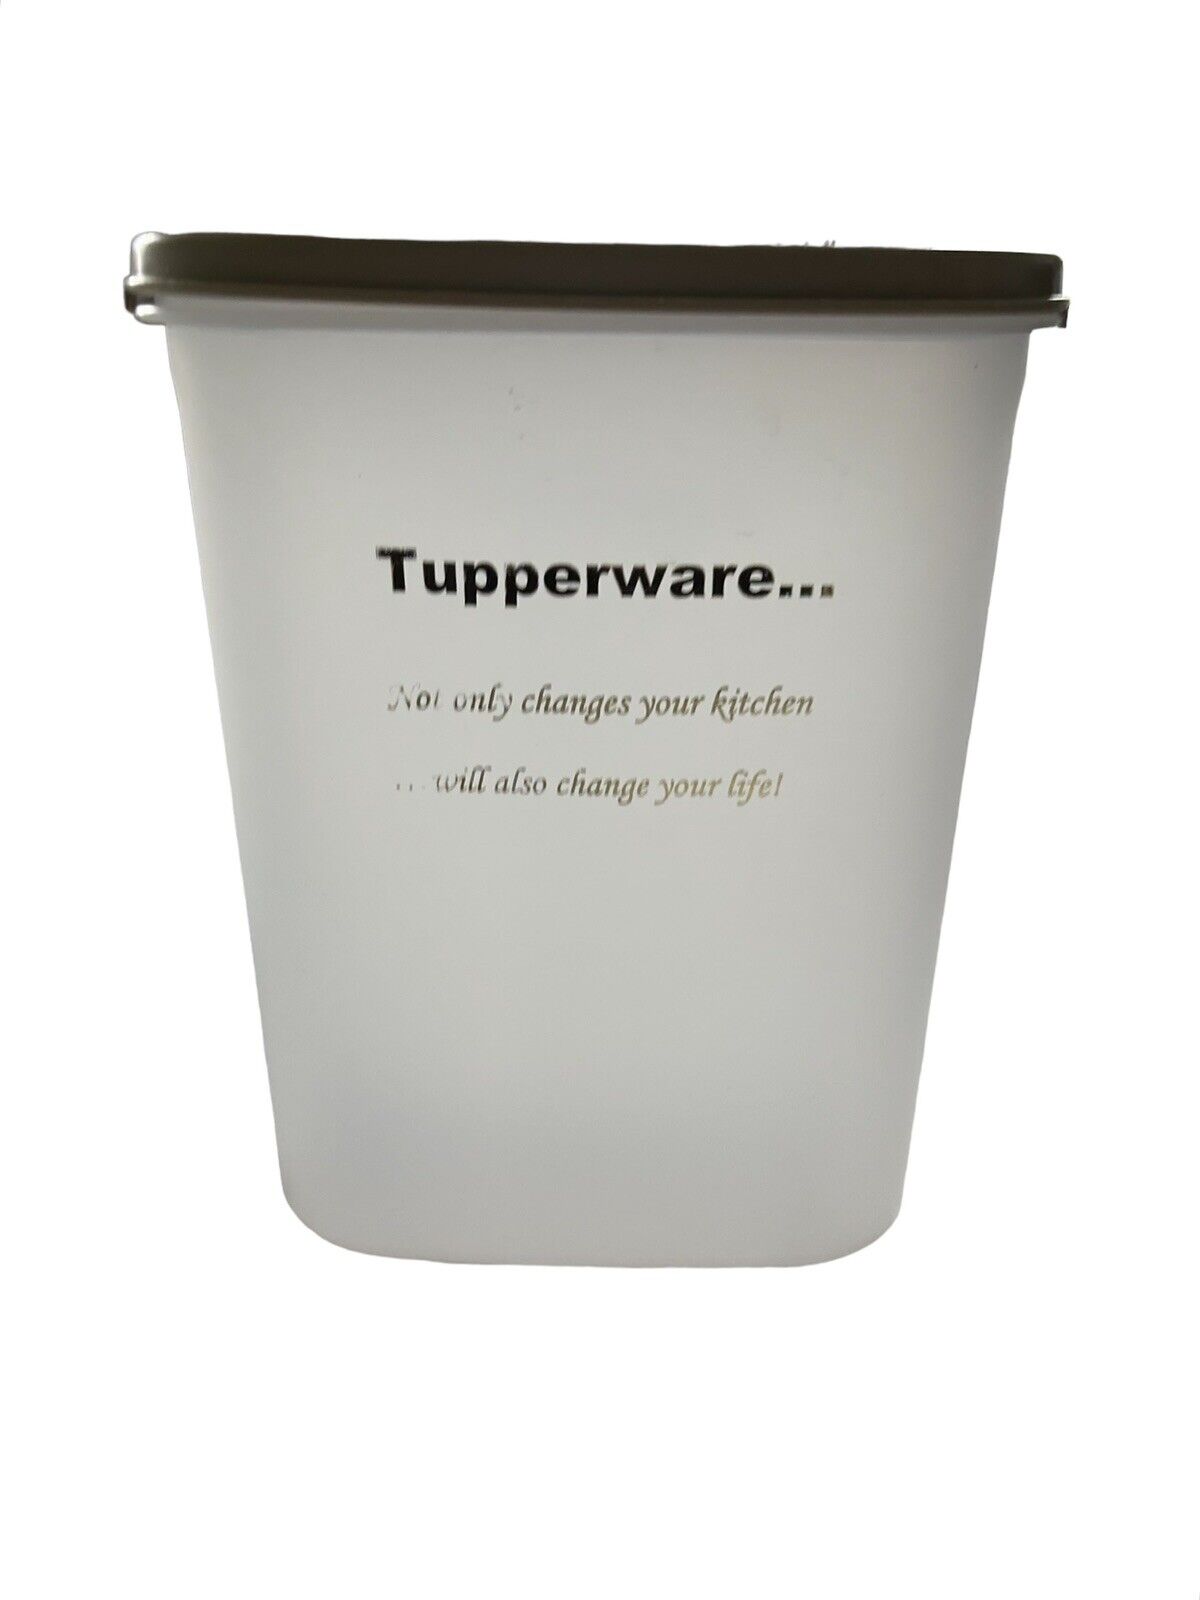 Tupperware Modular Mates Oval #4 Logo Container #1614 Consultant Gift Tan Seal